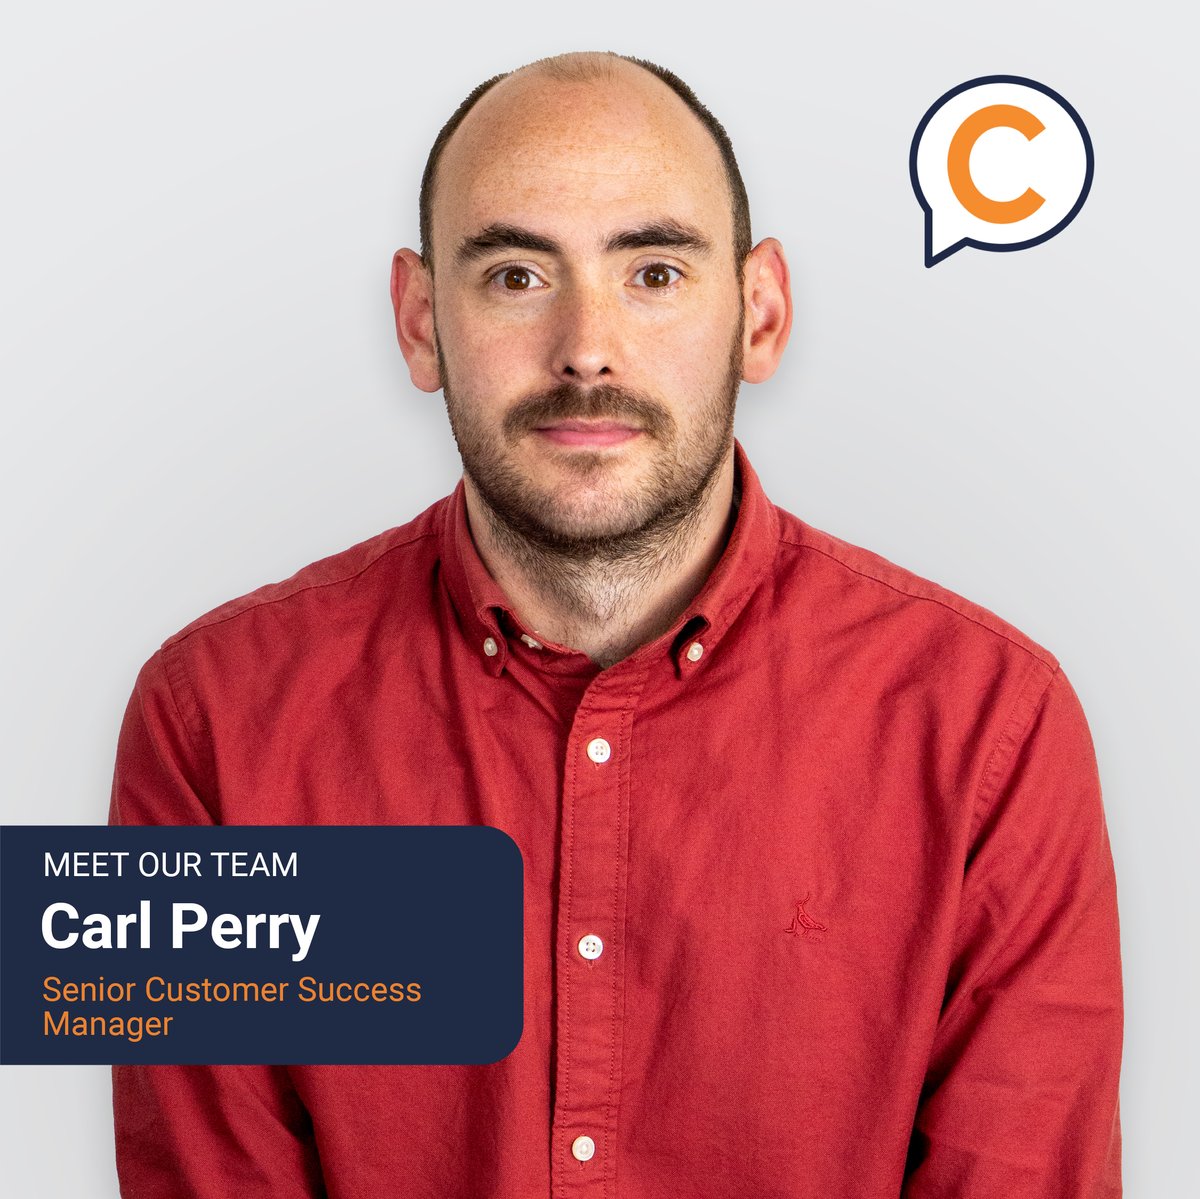 Carl just joined the Cubit team as #SeniorCustomerSuccessManager, meaning he’ll be one of your main points of contact with us. You’ll likely hear his recommendations on improving your #ITenvironment. He spends Saturdays playing thoroughly amateur-level football for #WitanAFC.